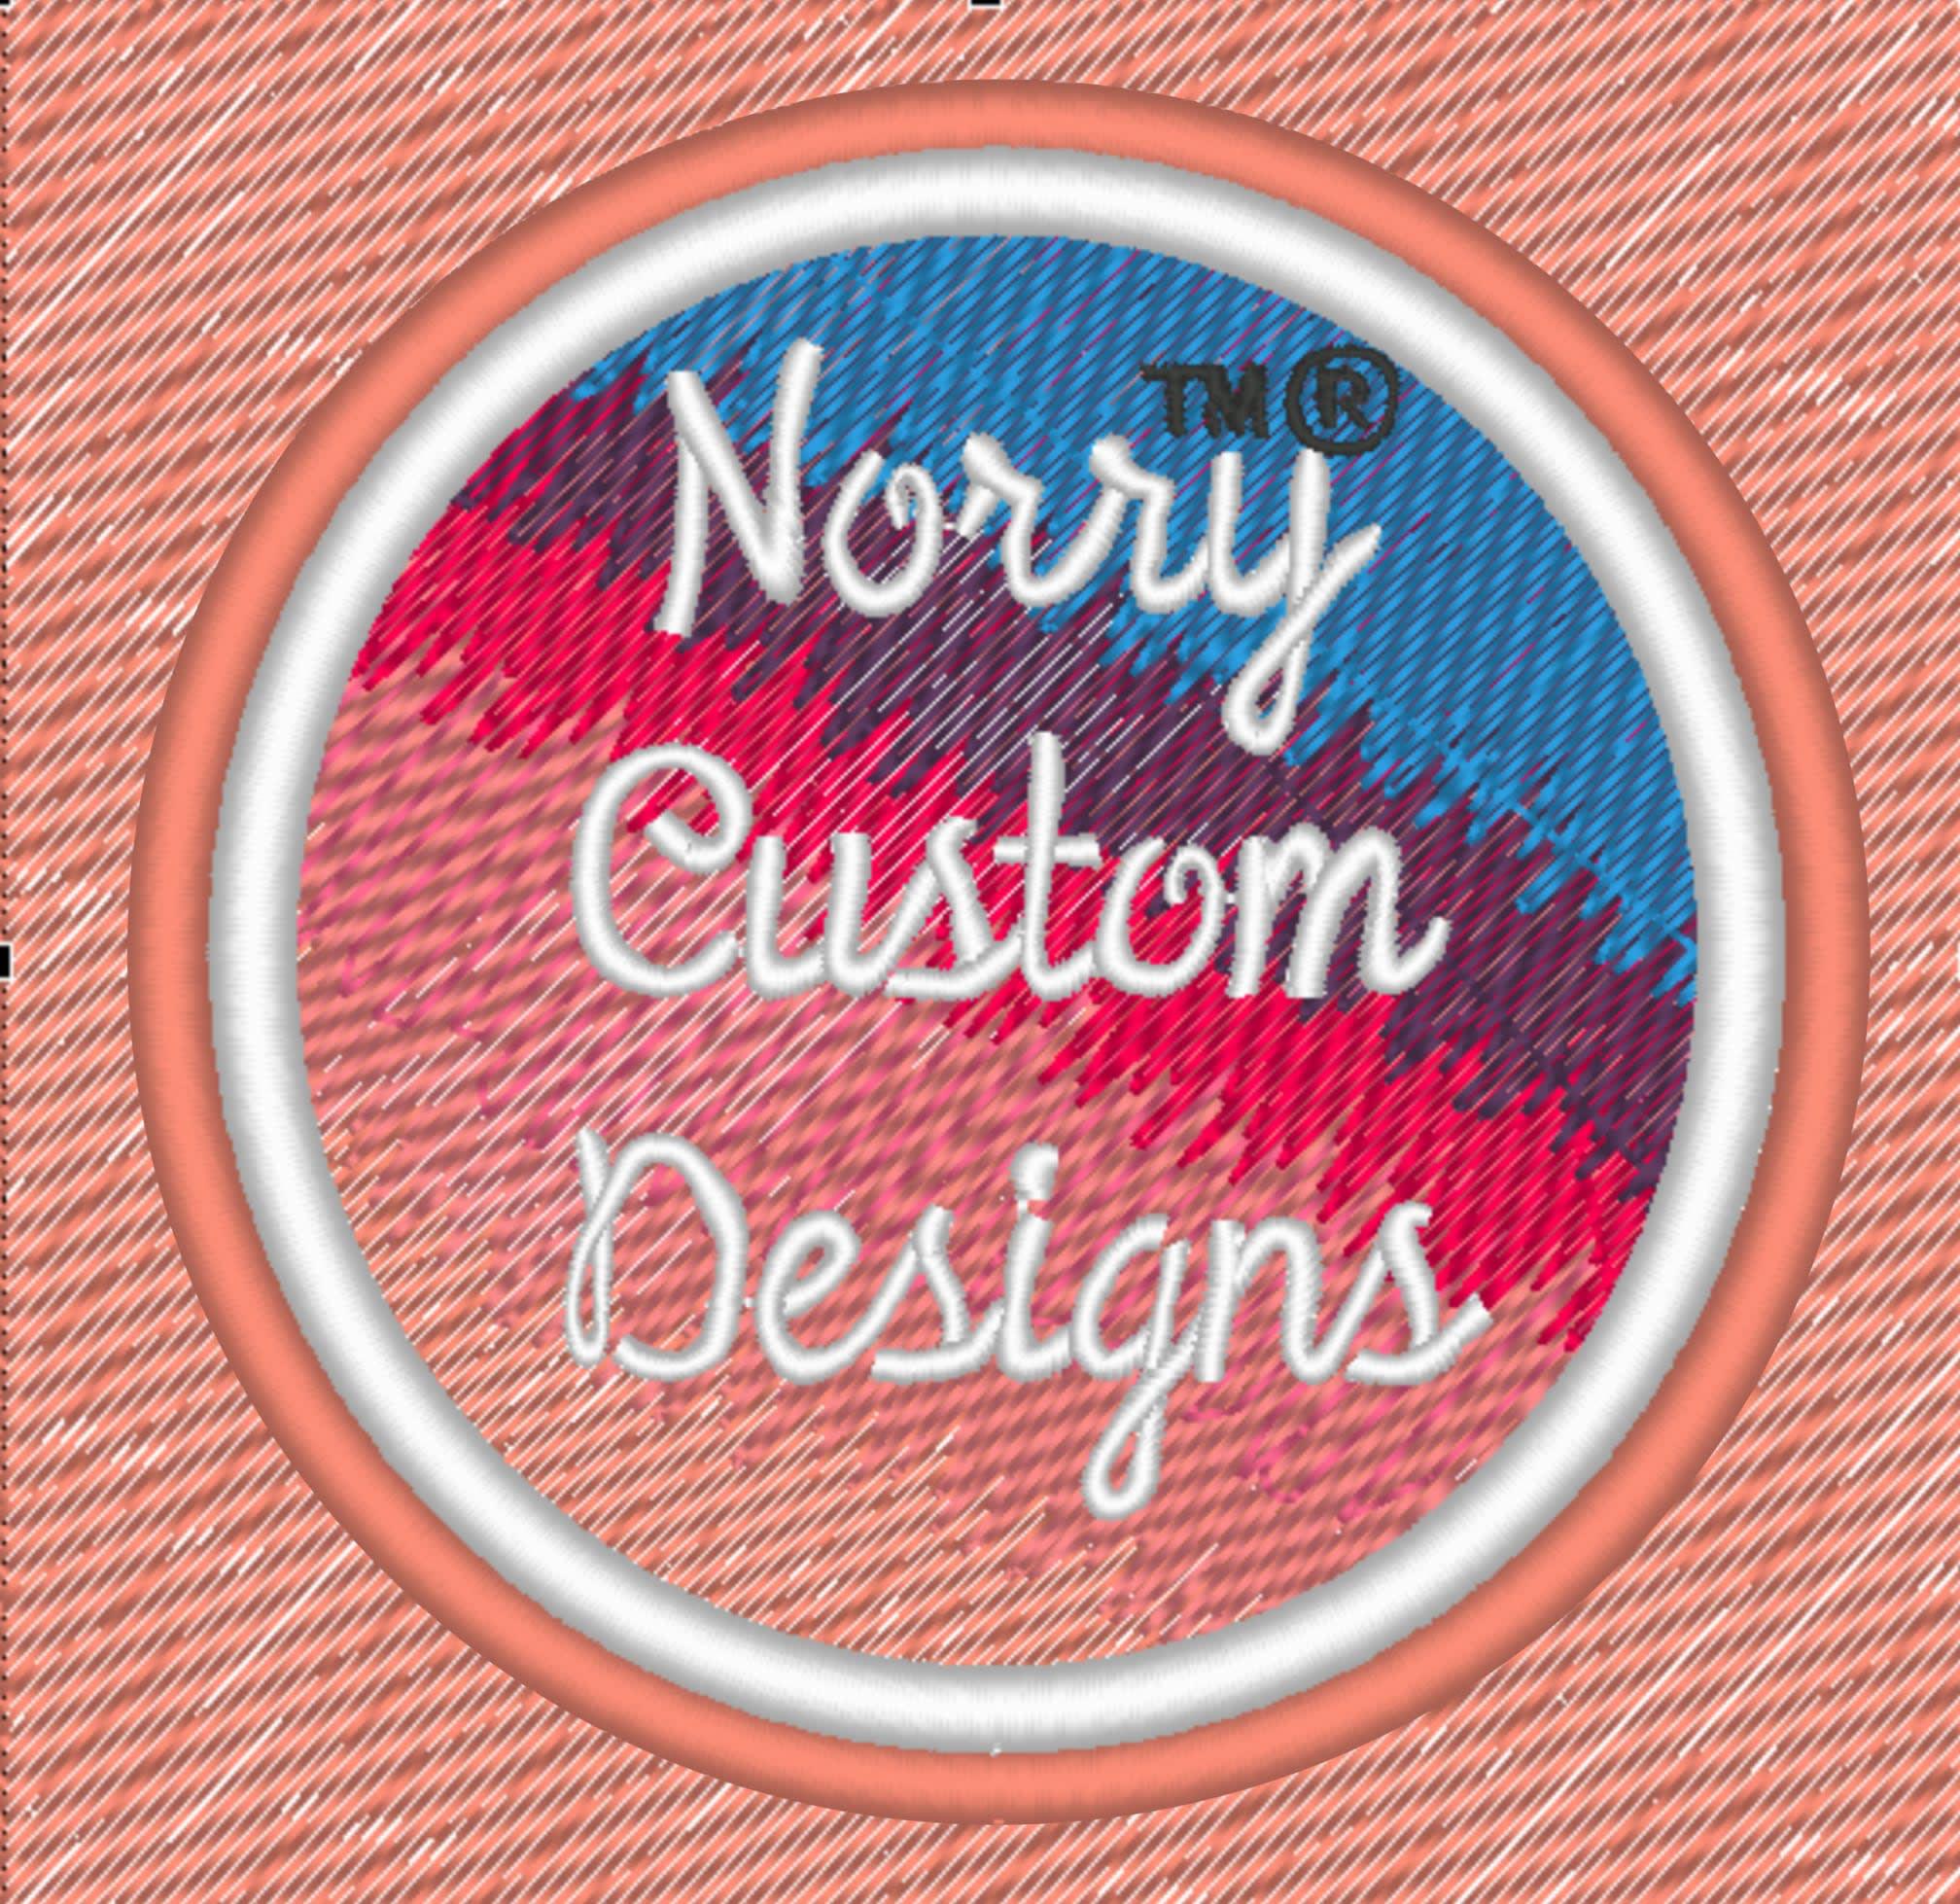 Images Norry Custom Designs